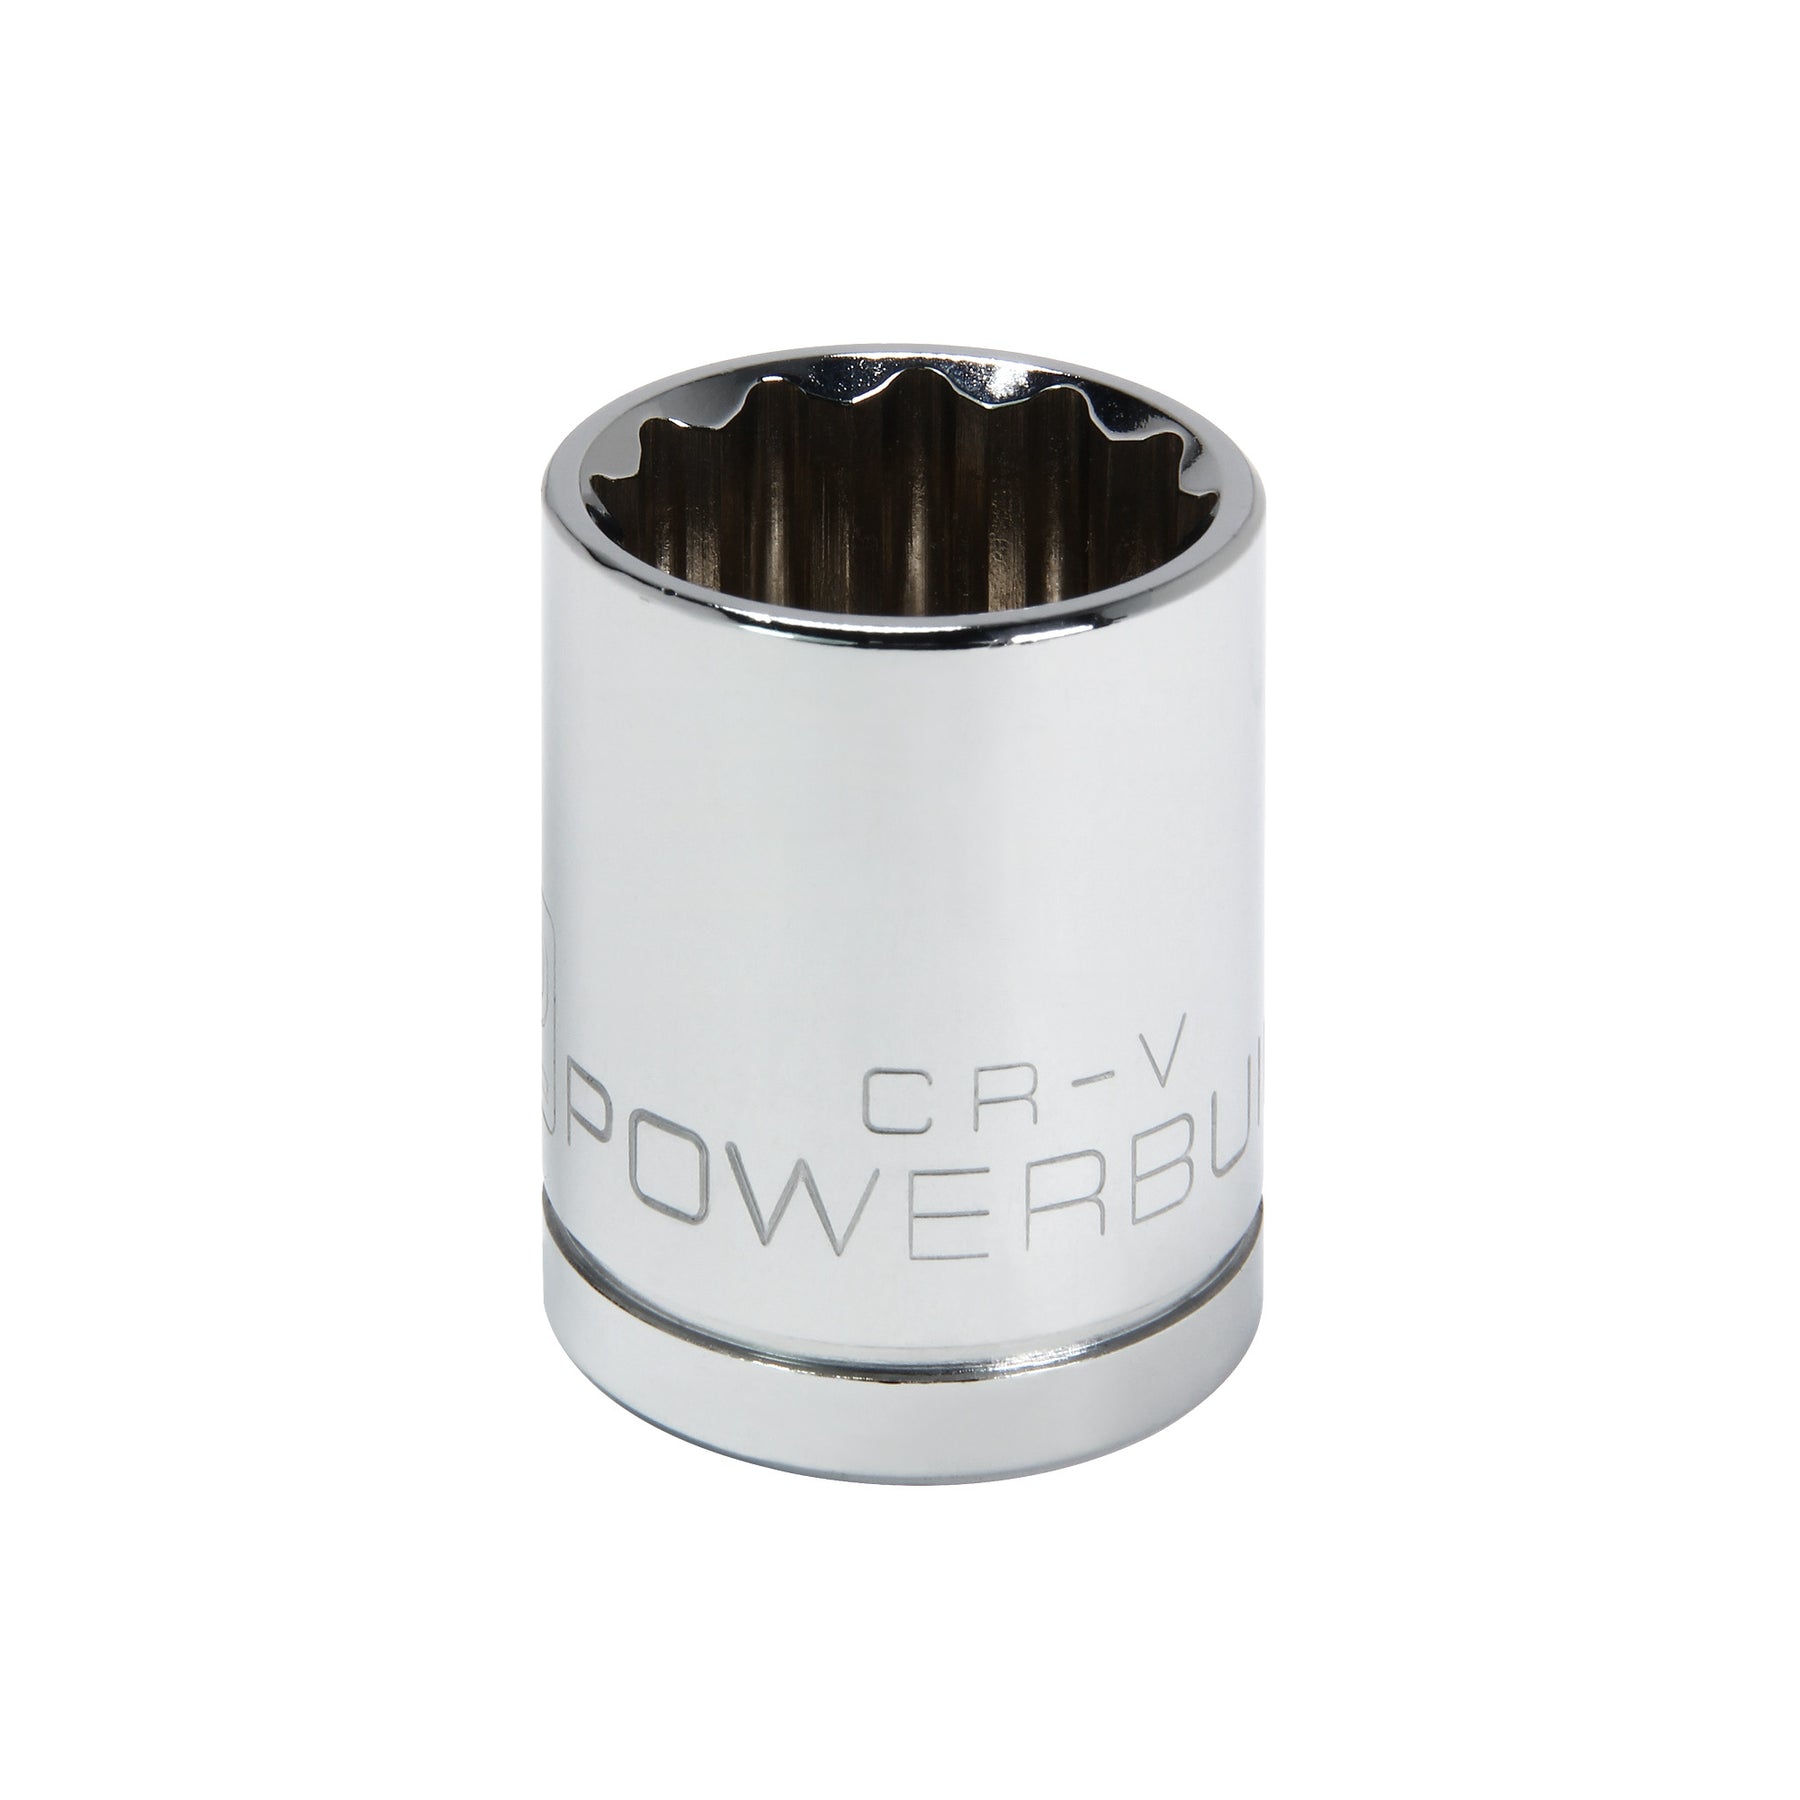 1/2 Inch Drive x 7/8 Inch 12 Point Shallow Socket